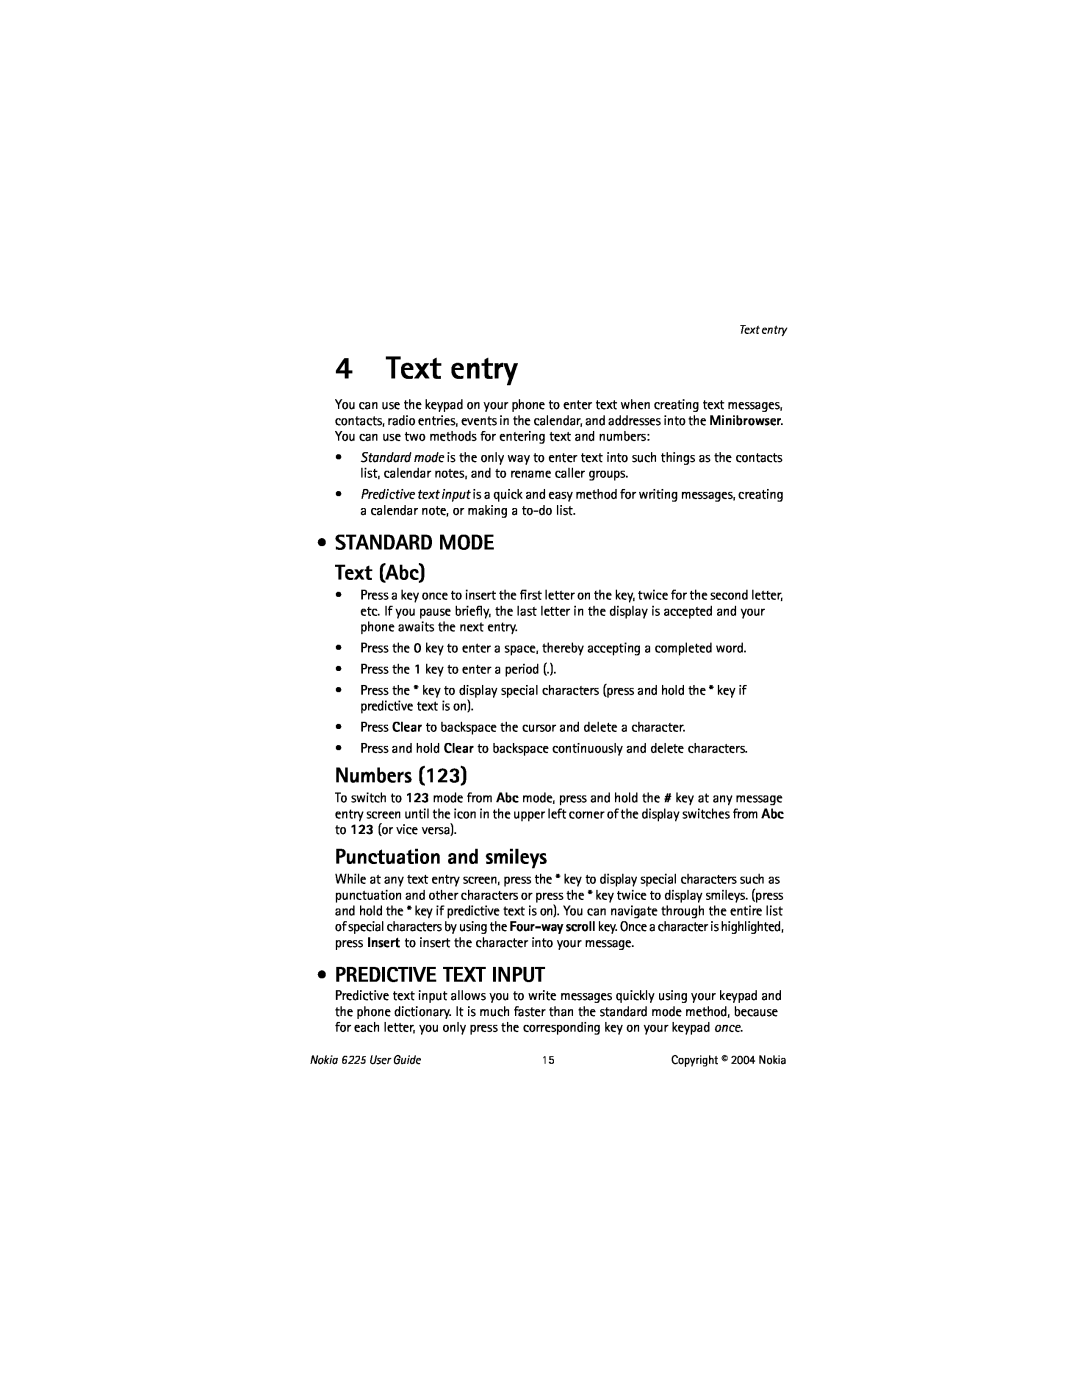 Nokia 6225 manual Text entry, Numbers, Punctuation and smileys, Predictive Text Input, STANDARD MODE Text Abc 